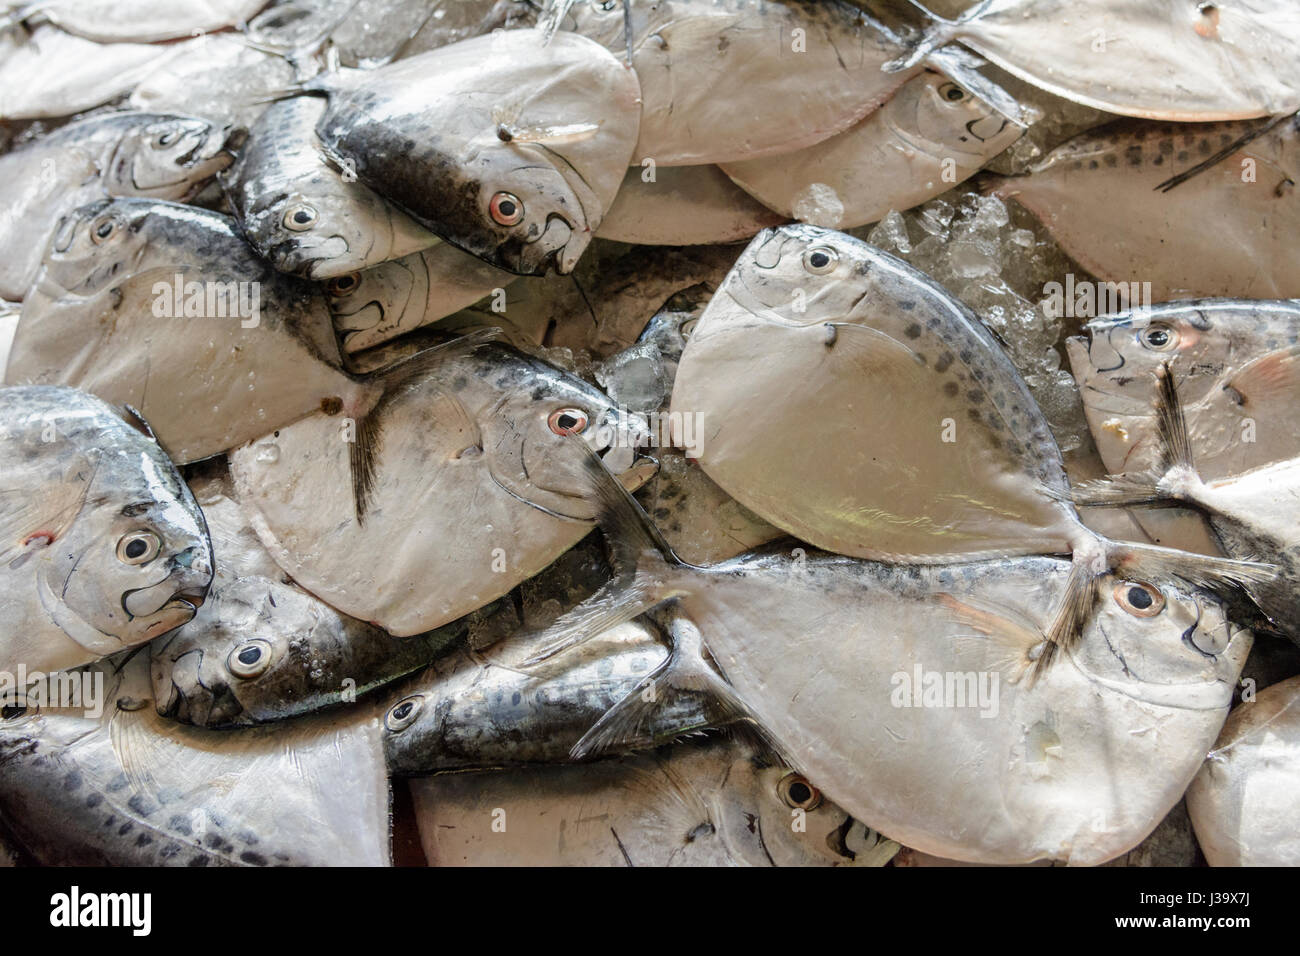 A pile of freshly caught fish on sale at the fish market in Thalassery (Tellicherry), Kannur district (Cannanore), Kerala, South India, South Asia Stock Photo